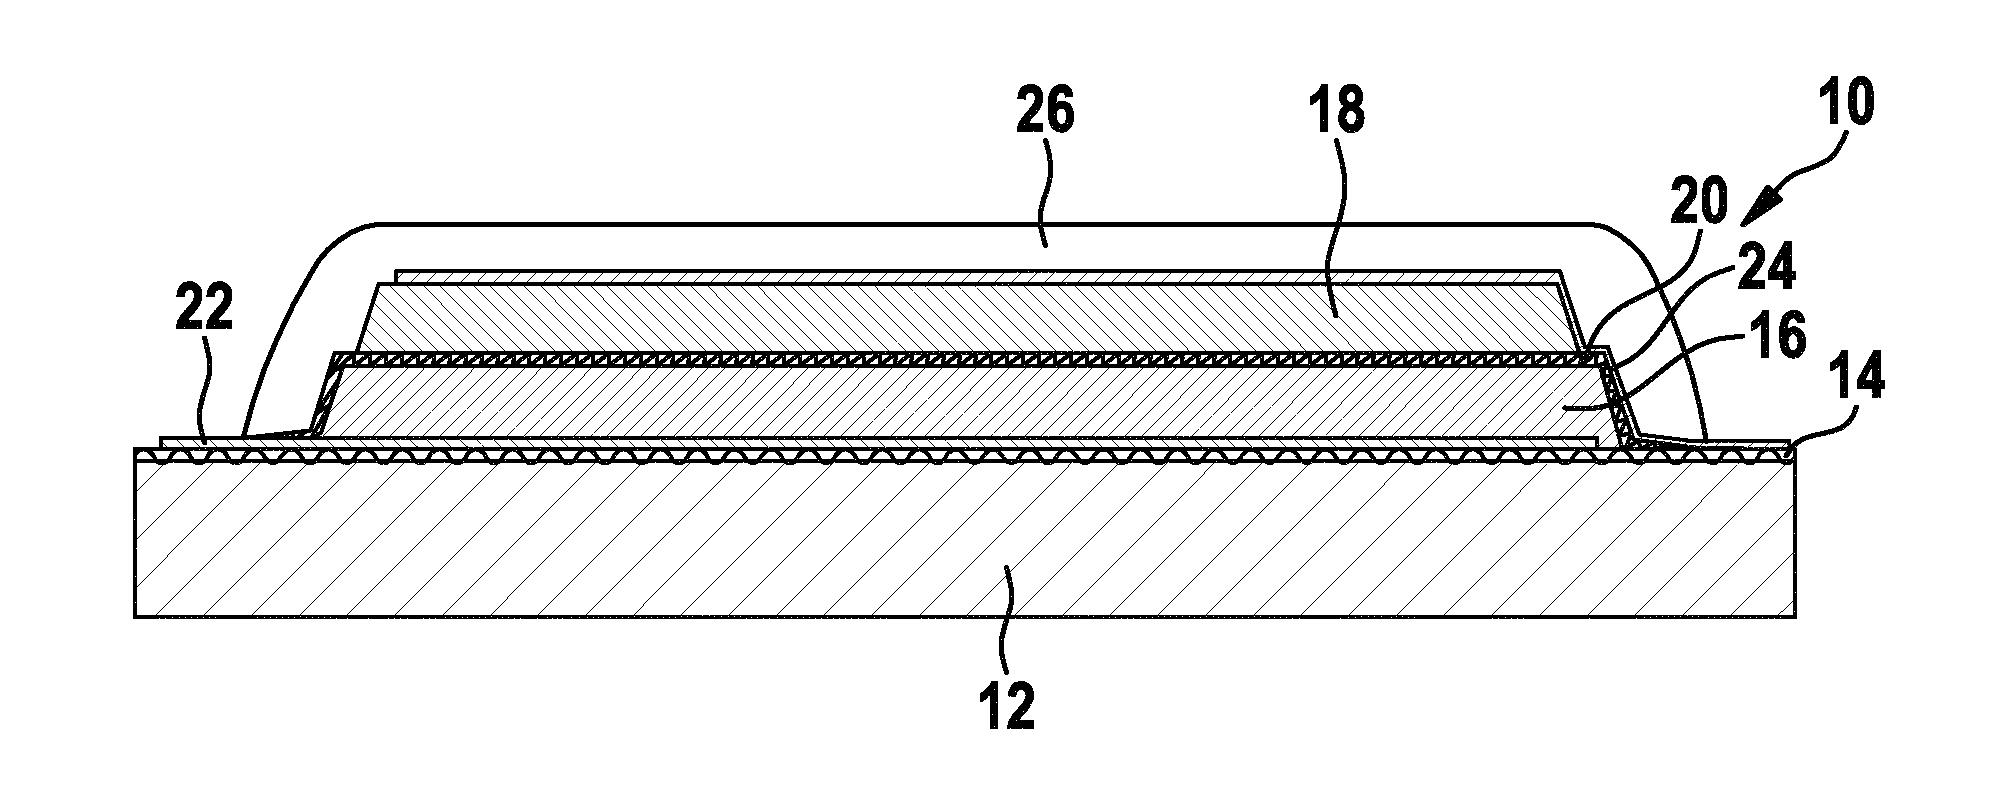 Layer system, energy store, and method for manufacturing an energy store